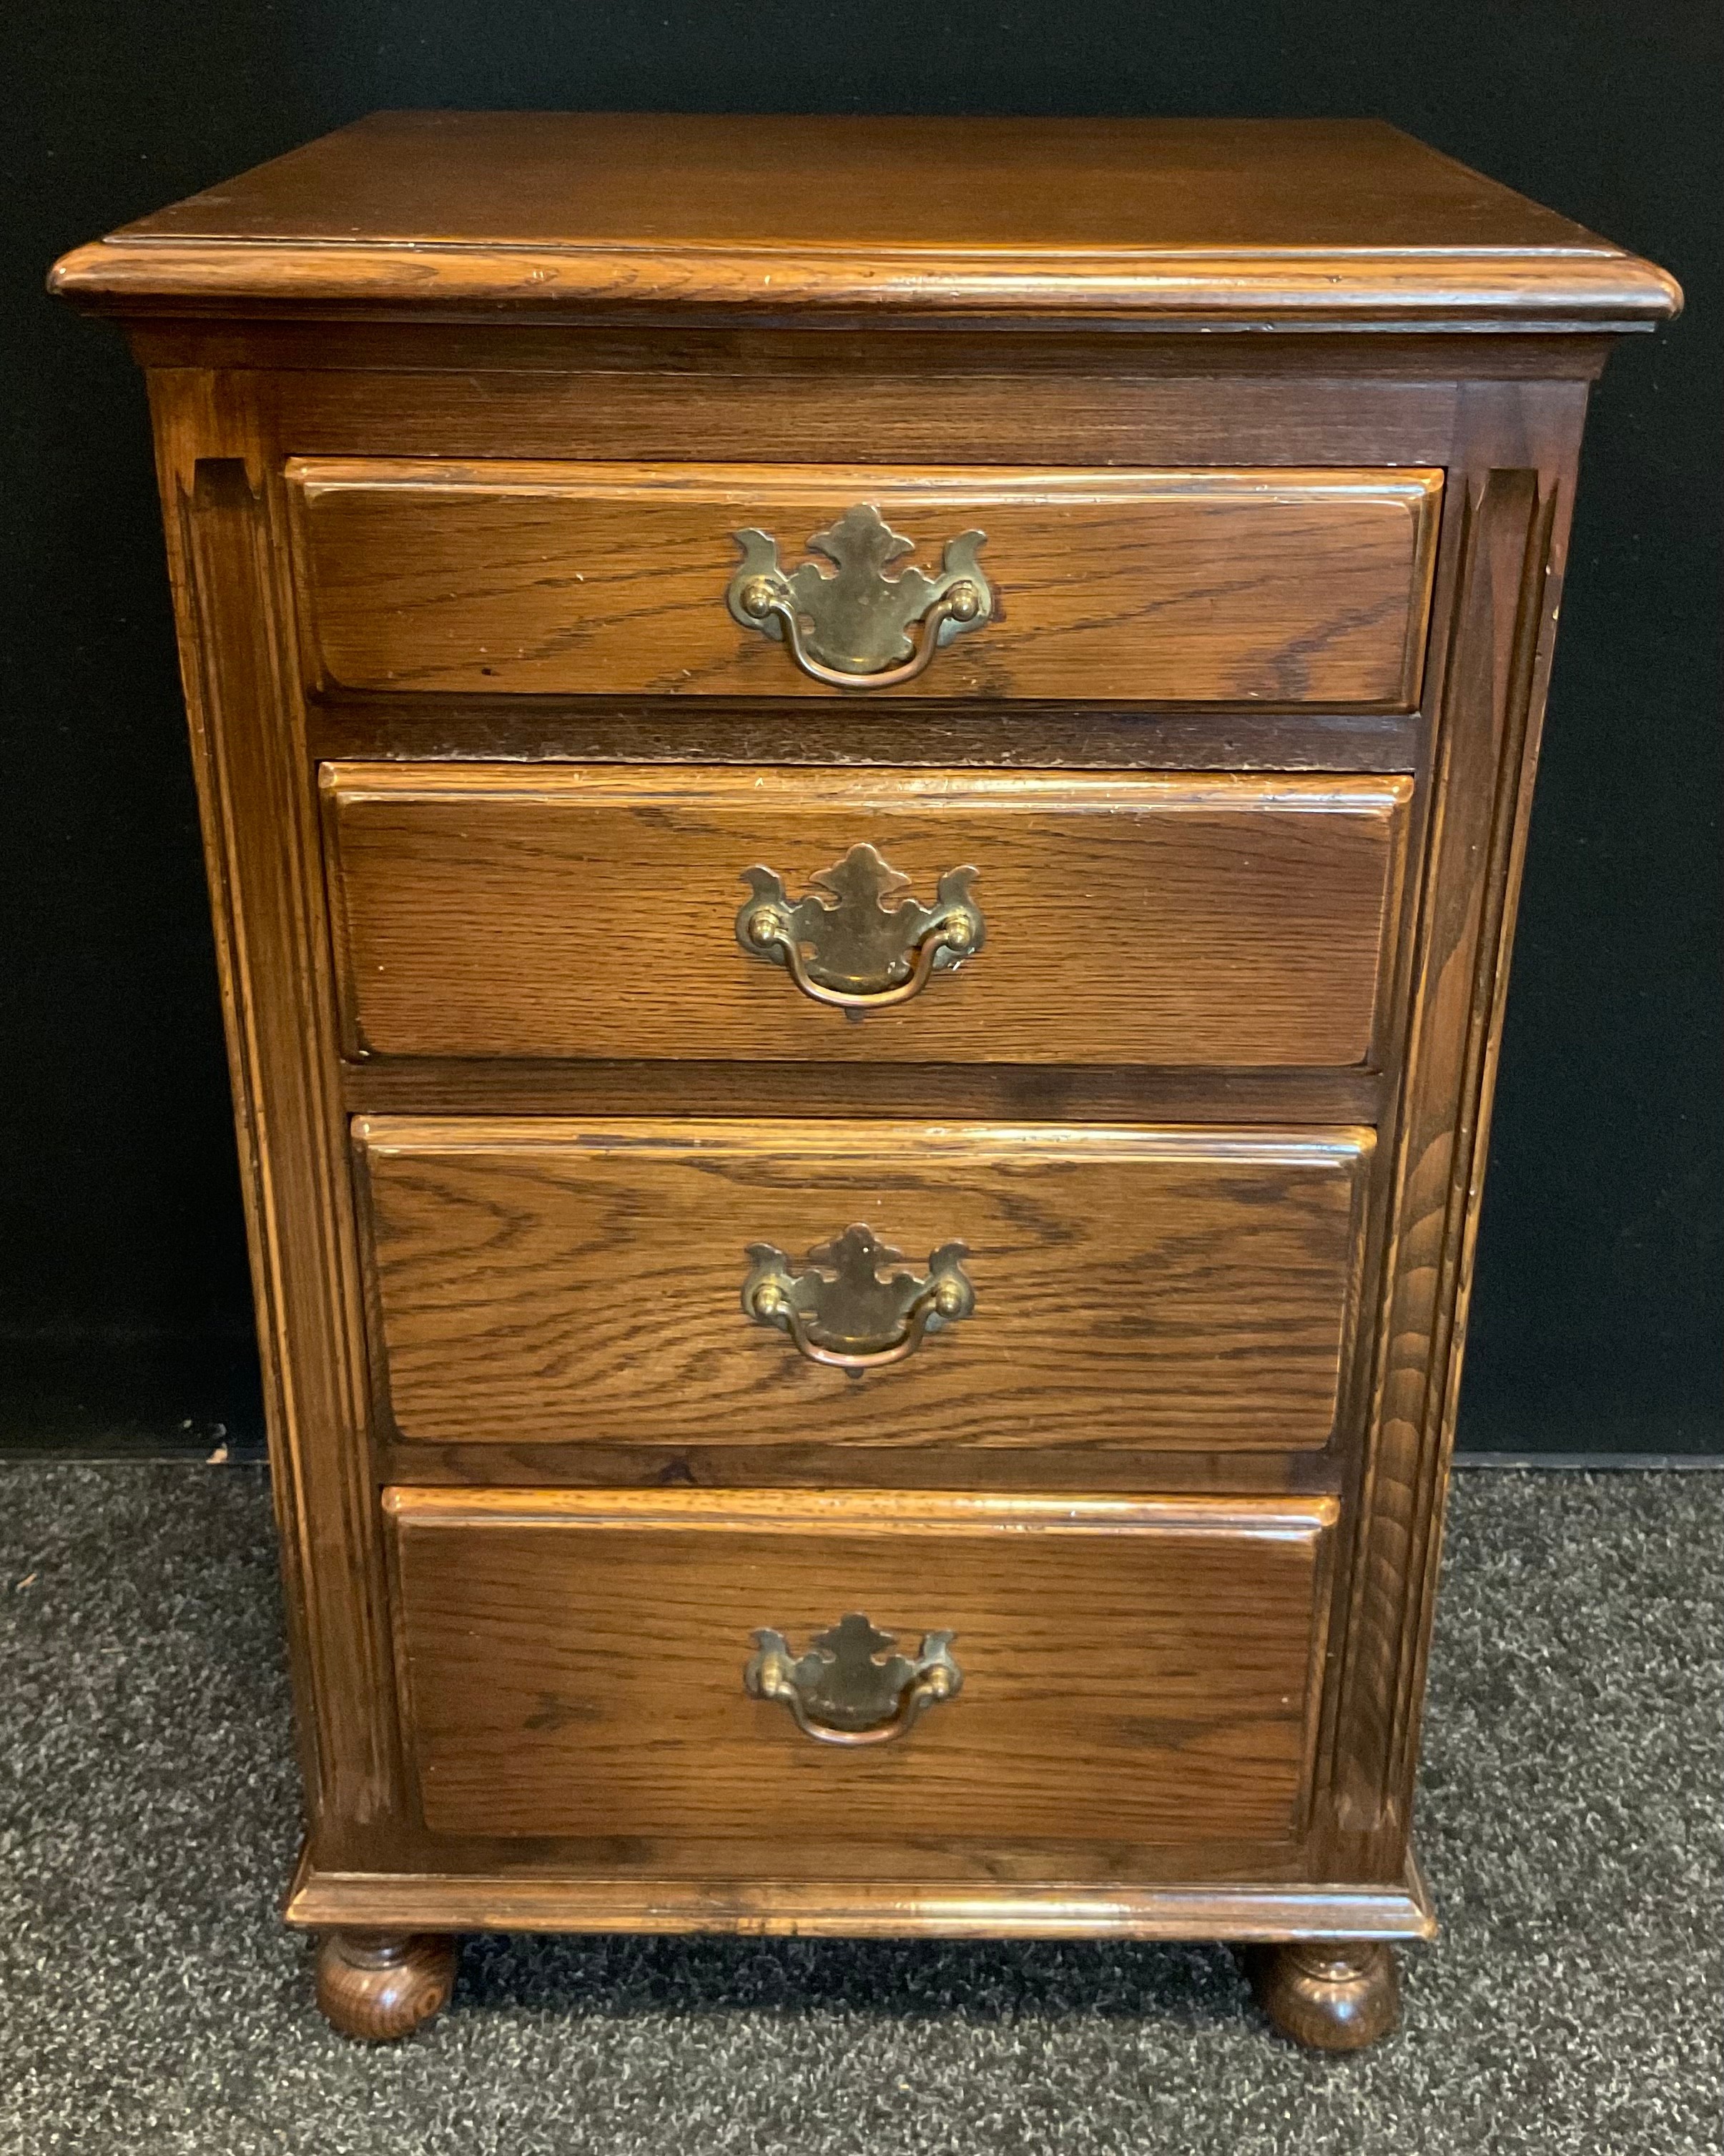 A small Bevan Funnell narrow oak chest, four graduated drawers, bun feet, 70cm tall x 45cm wide x - Image 3 of 3